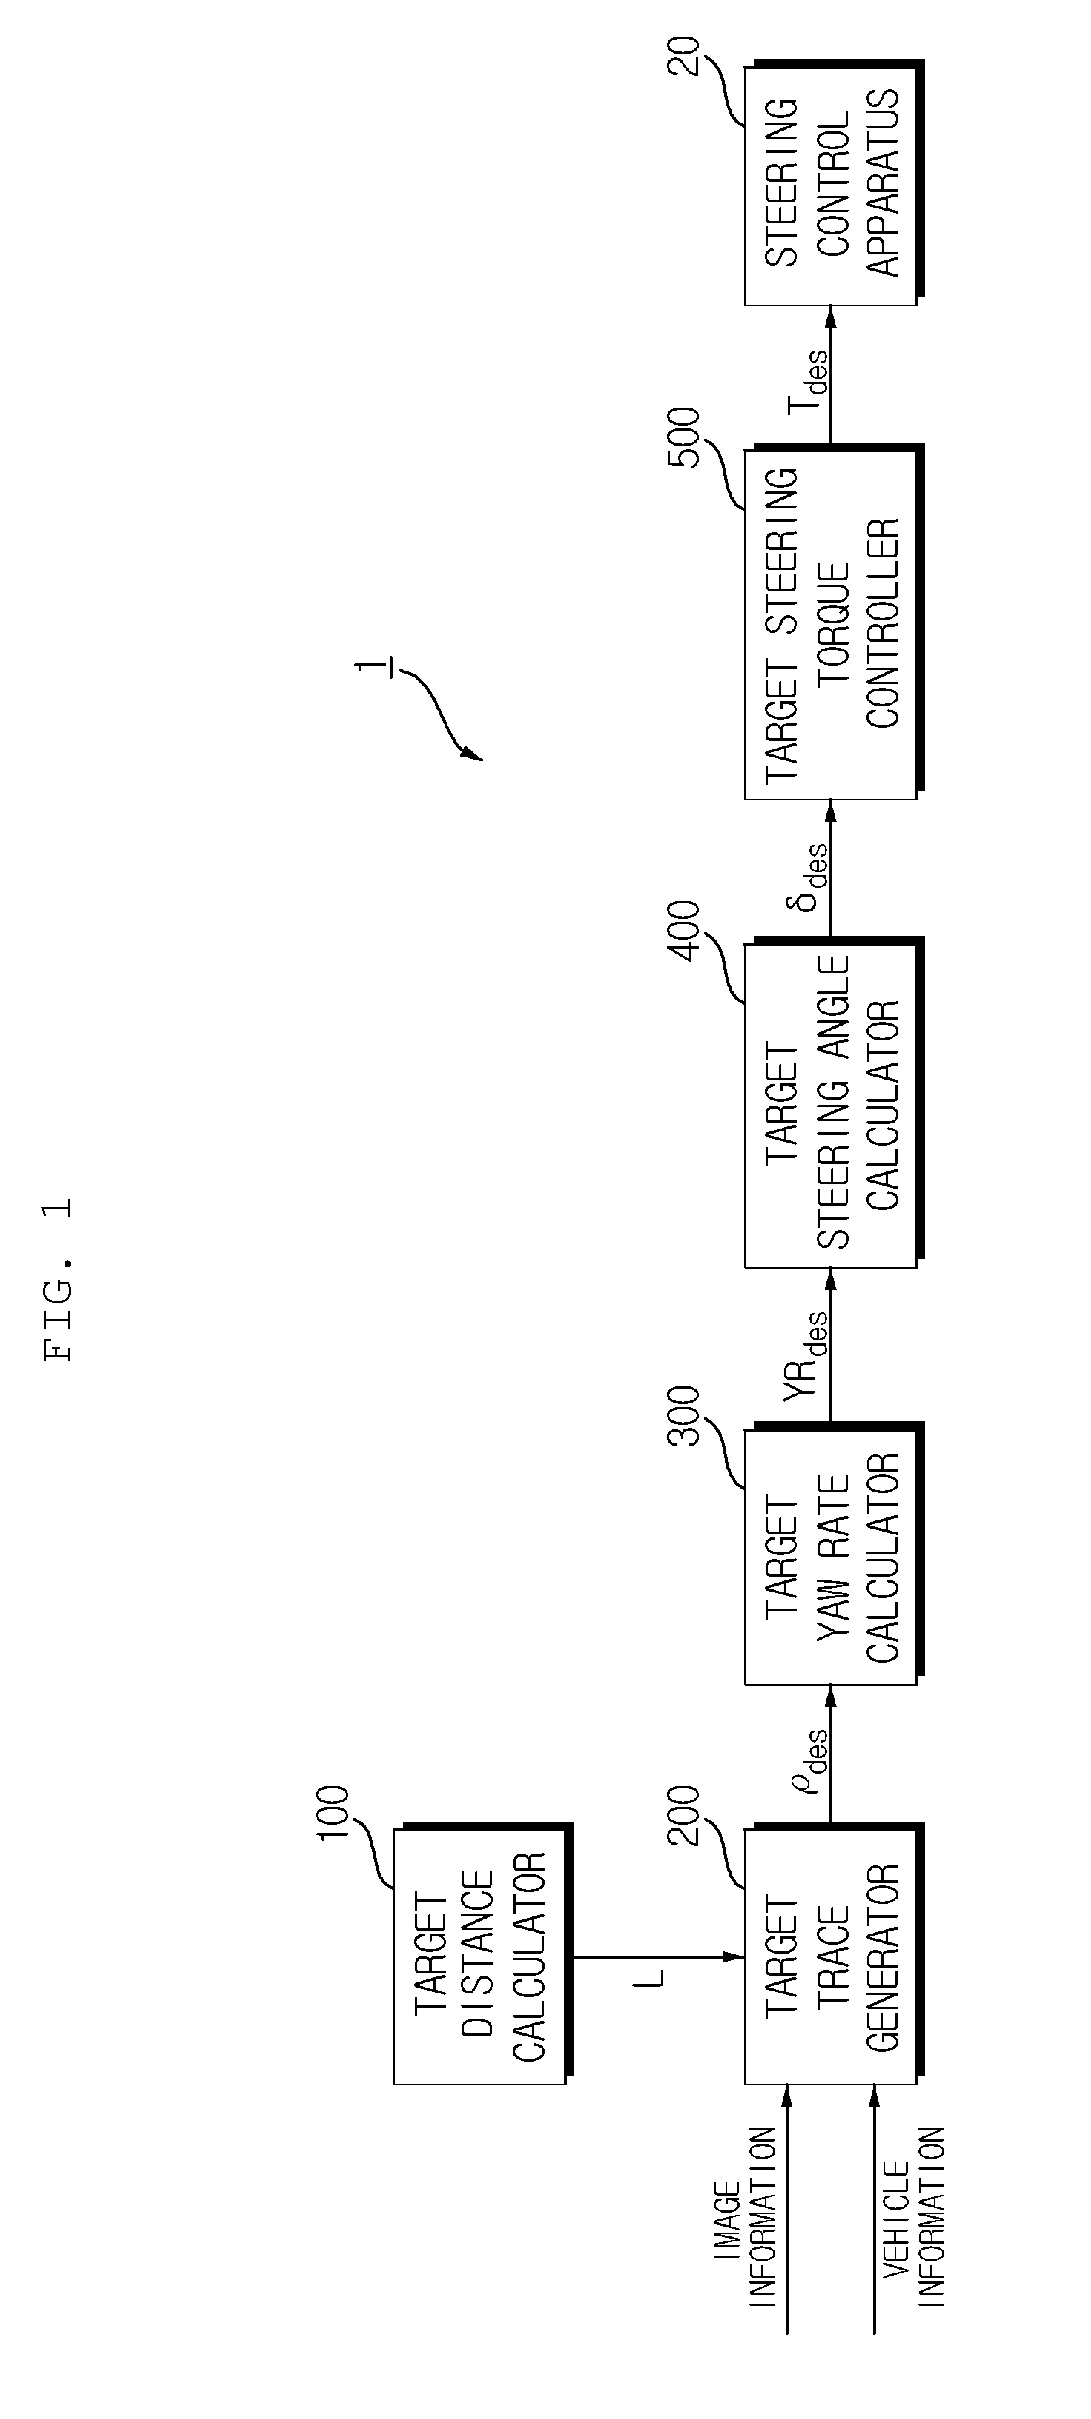 Lane keeping control system and method